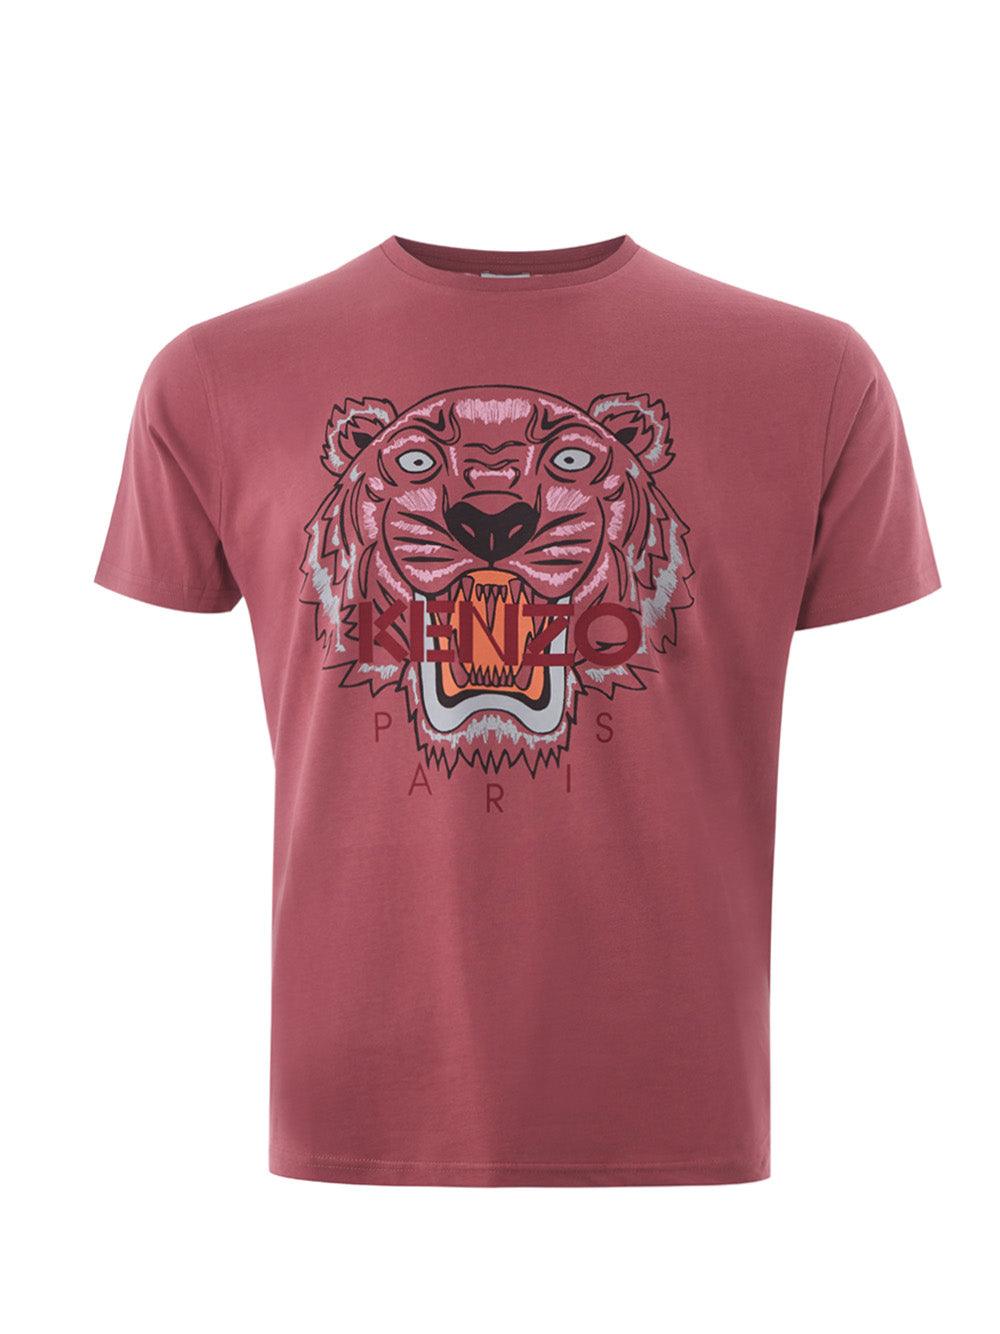 Kenzo Light Red Cotton T-Shirt with Tiger Print and Front Logo - Ellie Belle